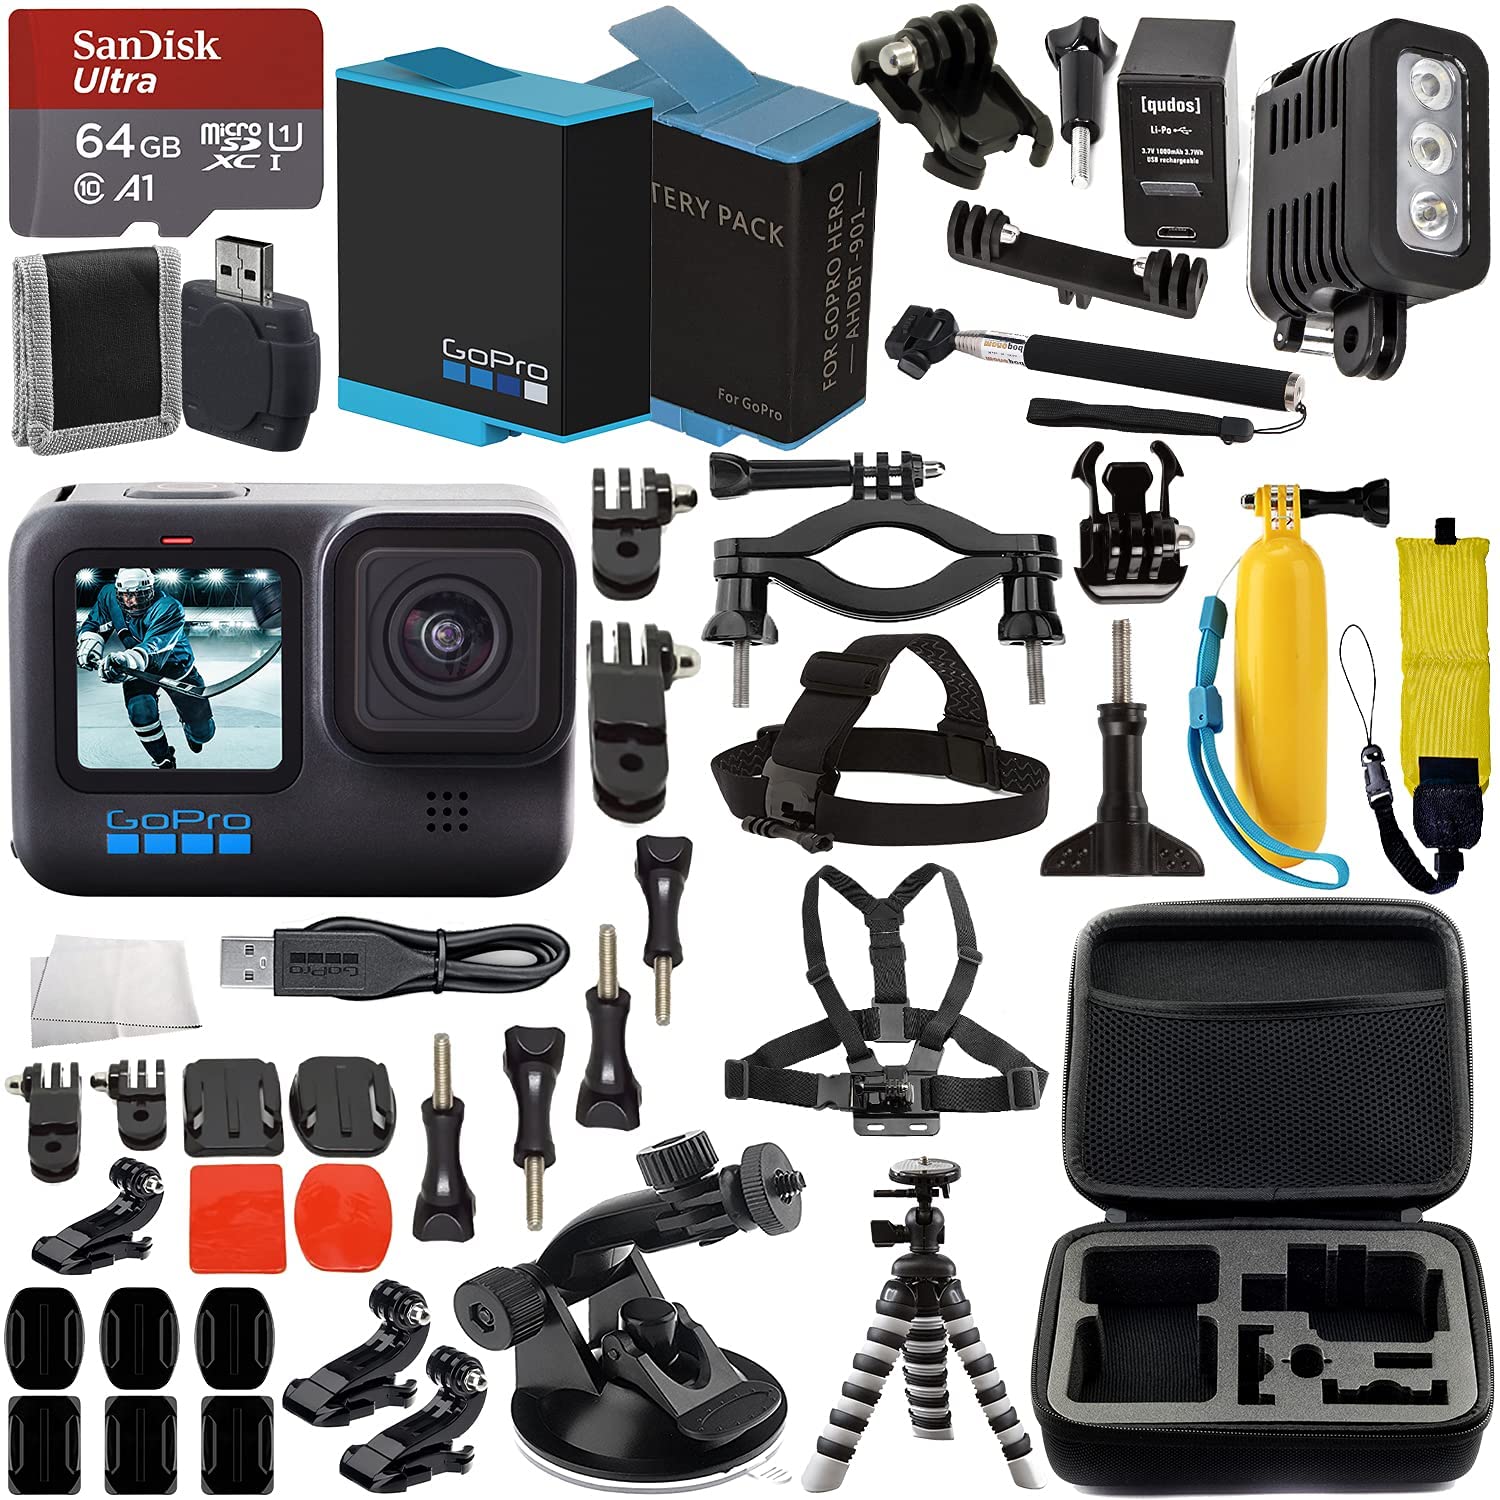 GoPro HERO10 (Hero 10) Black with Premium Accessory Bundle: SanDisk Ultra 64GB microSD Memory Card, Replacement Battery, Underwater LED Light with Bracket, Water Resistant Protective Case & More